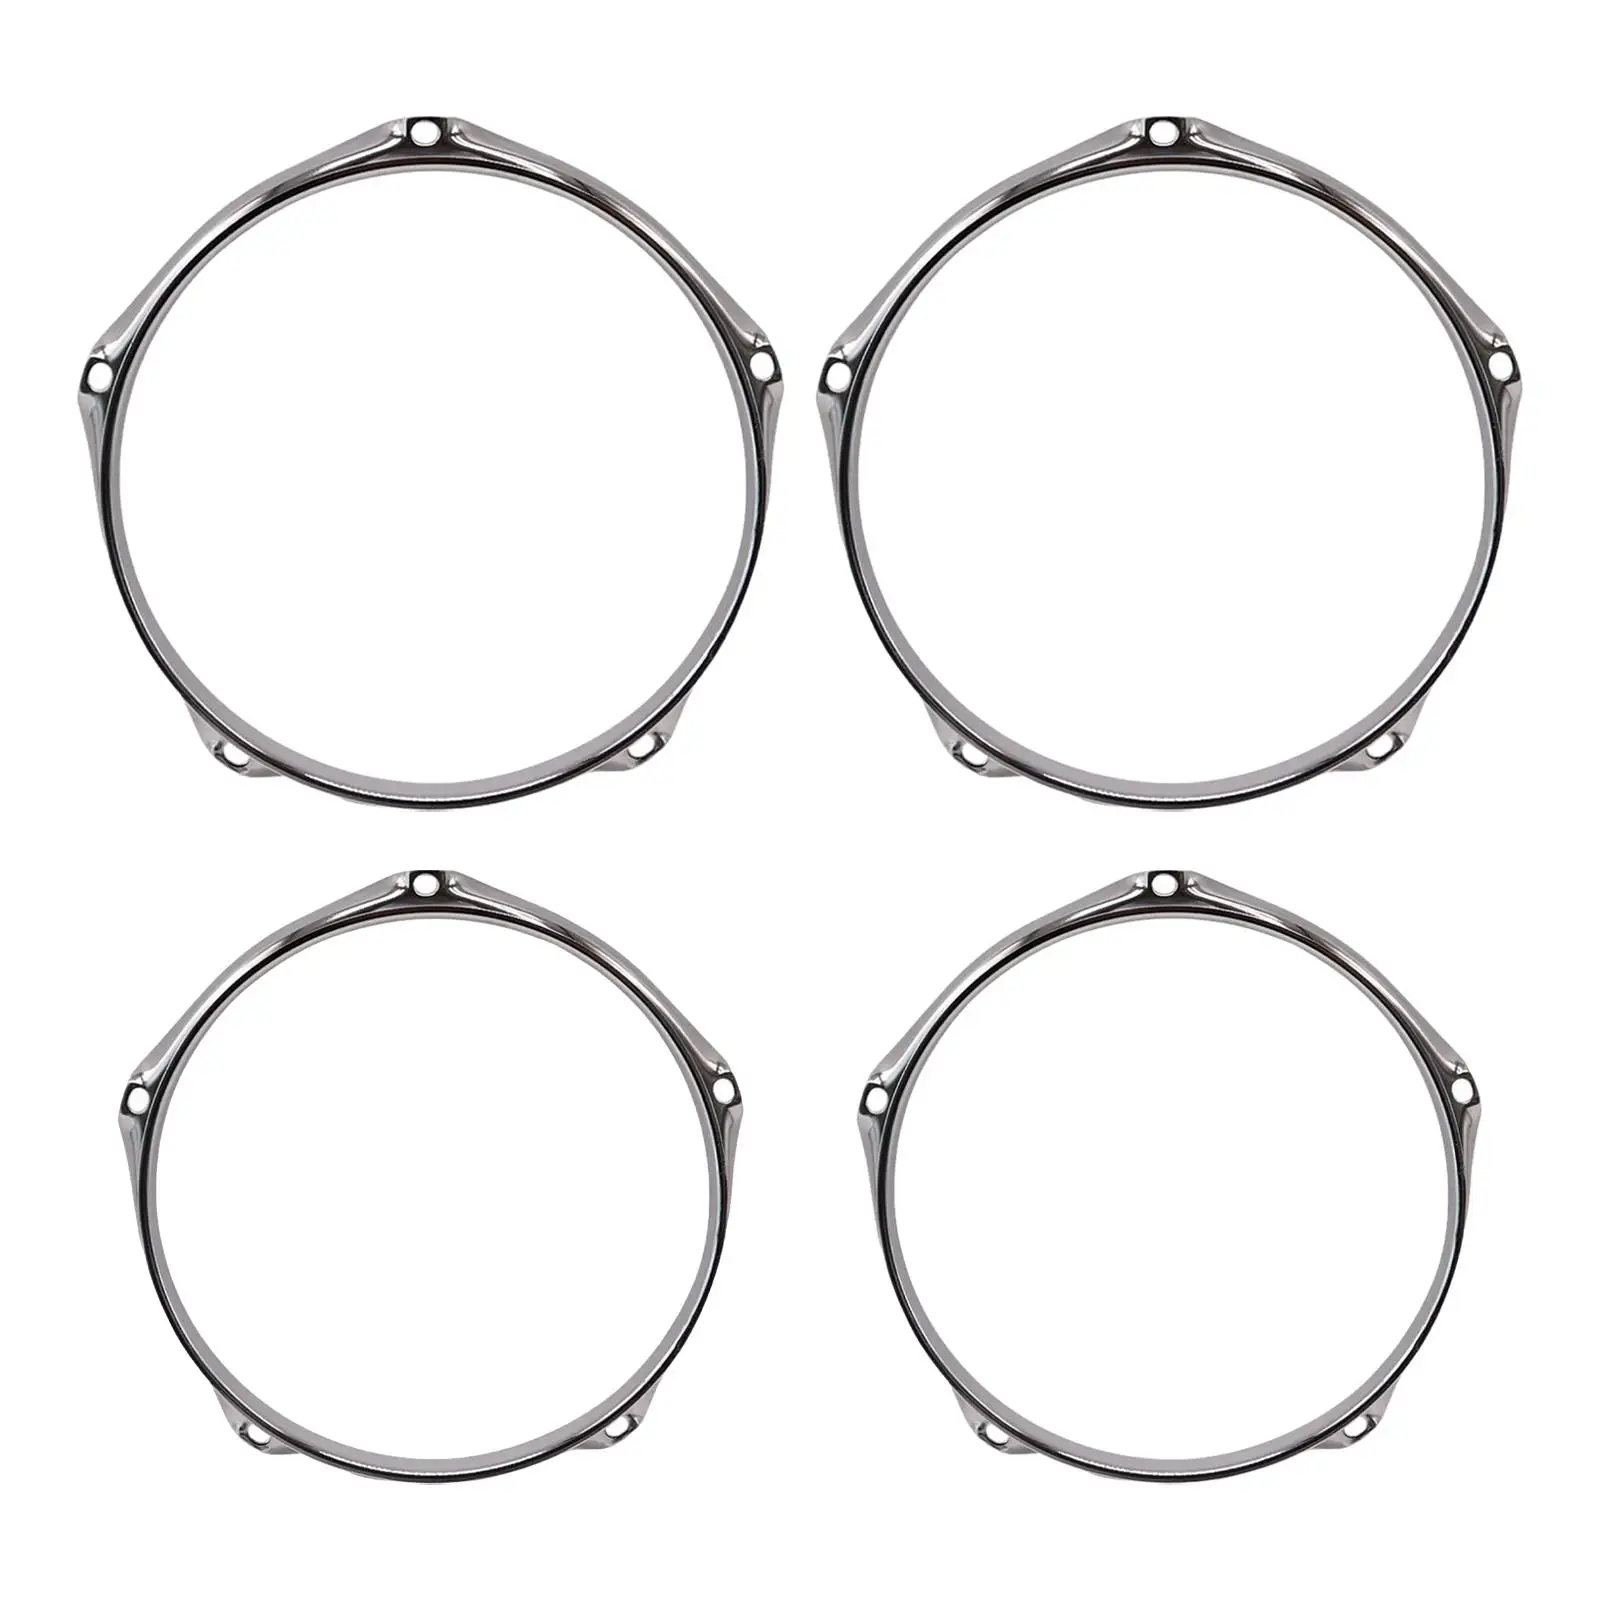 s Tom Drum Hoop Percussion Instrument Hoop for Accessory Home Decor